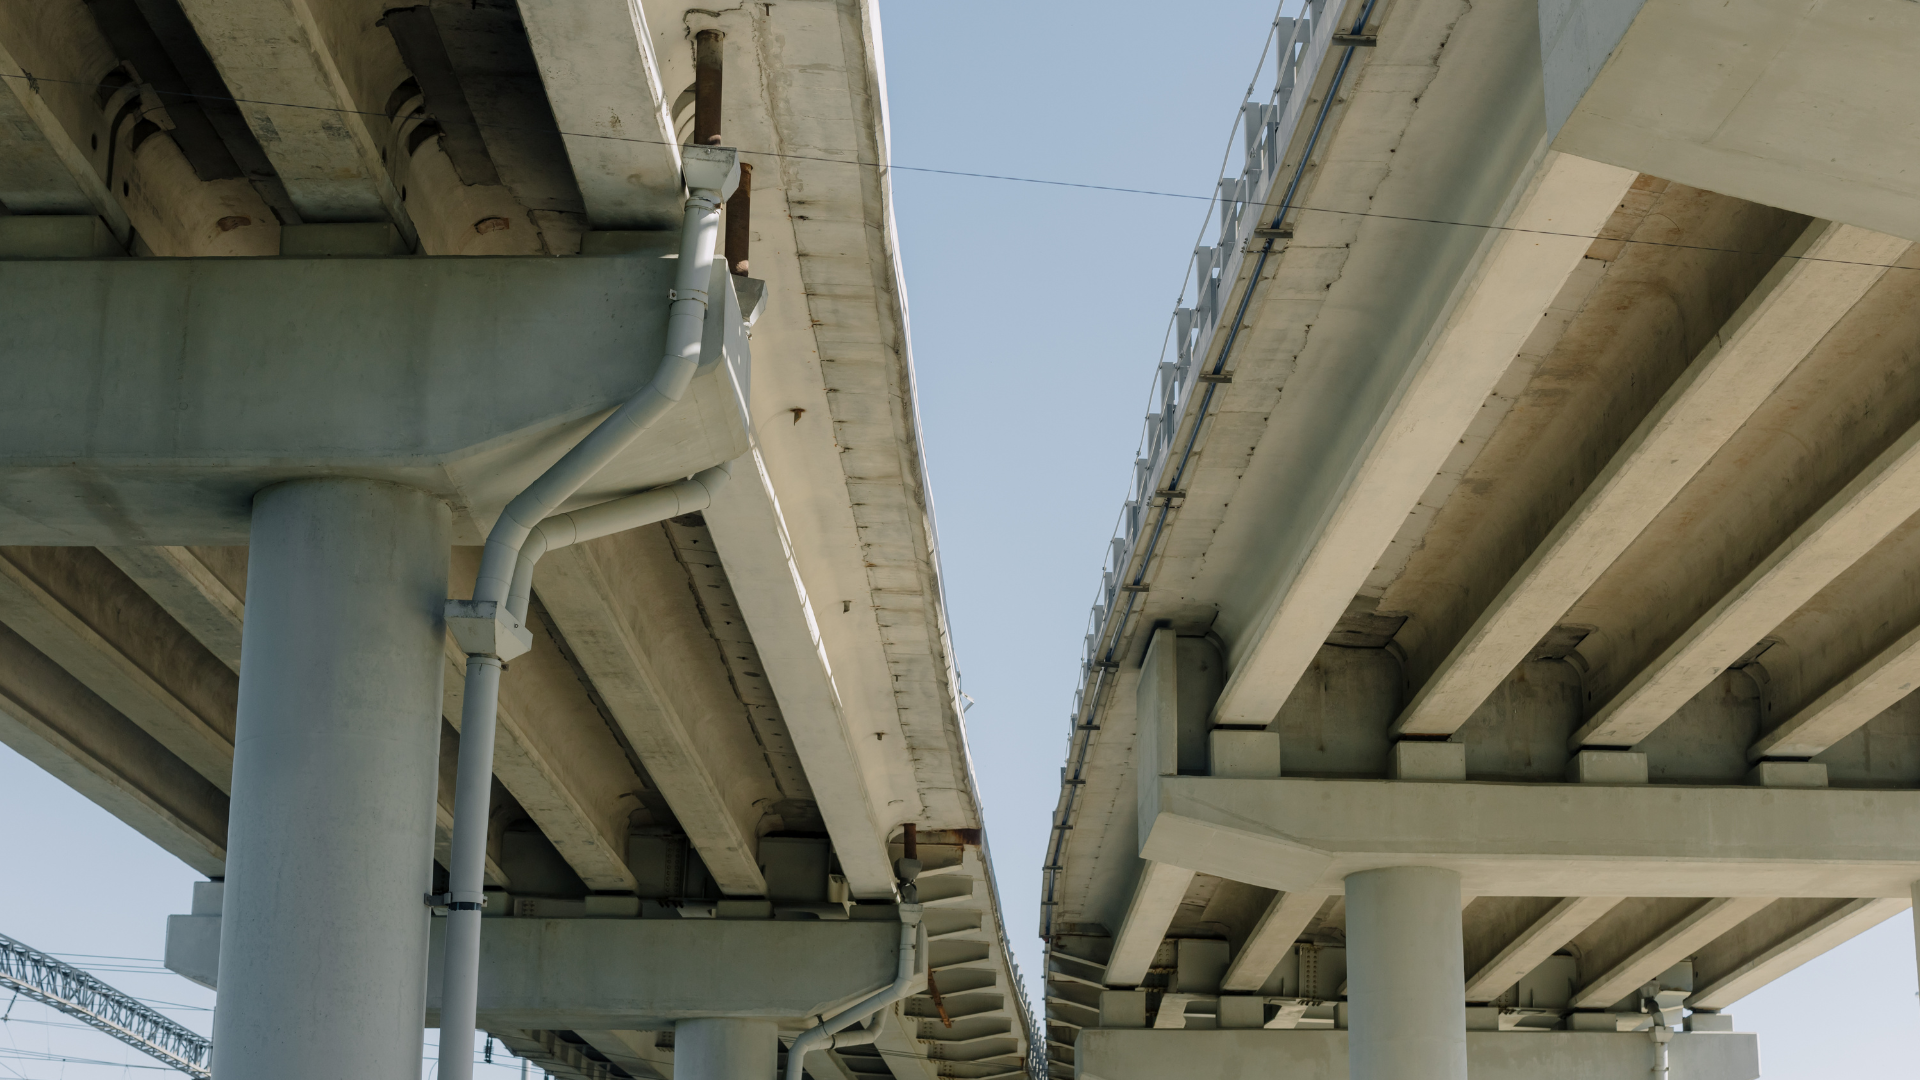 Integral abutment bridges, a popular bridge type in Illinois, are held up with piles and do not have bridge deck joints &mdash; through which saltwater leaks and is one of the leading causes of bridge deterioration.